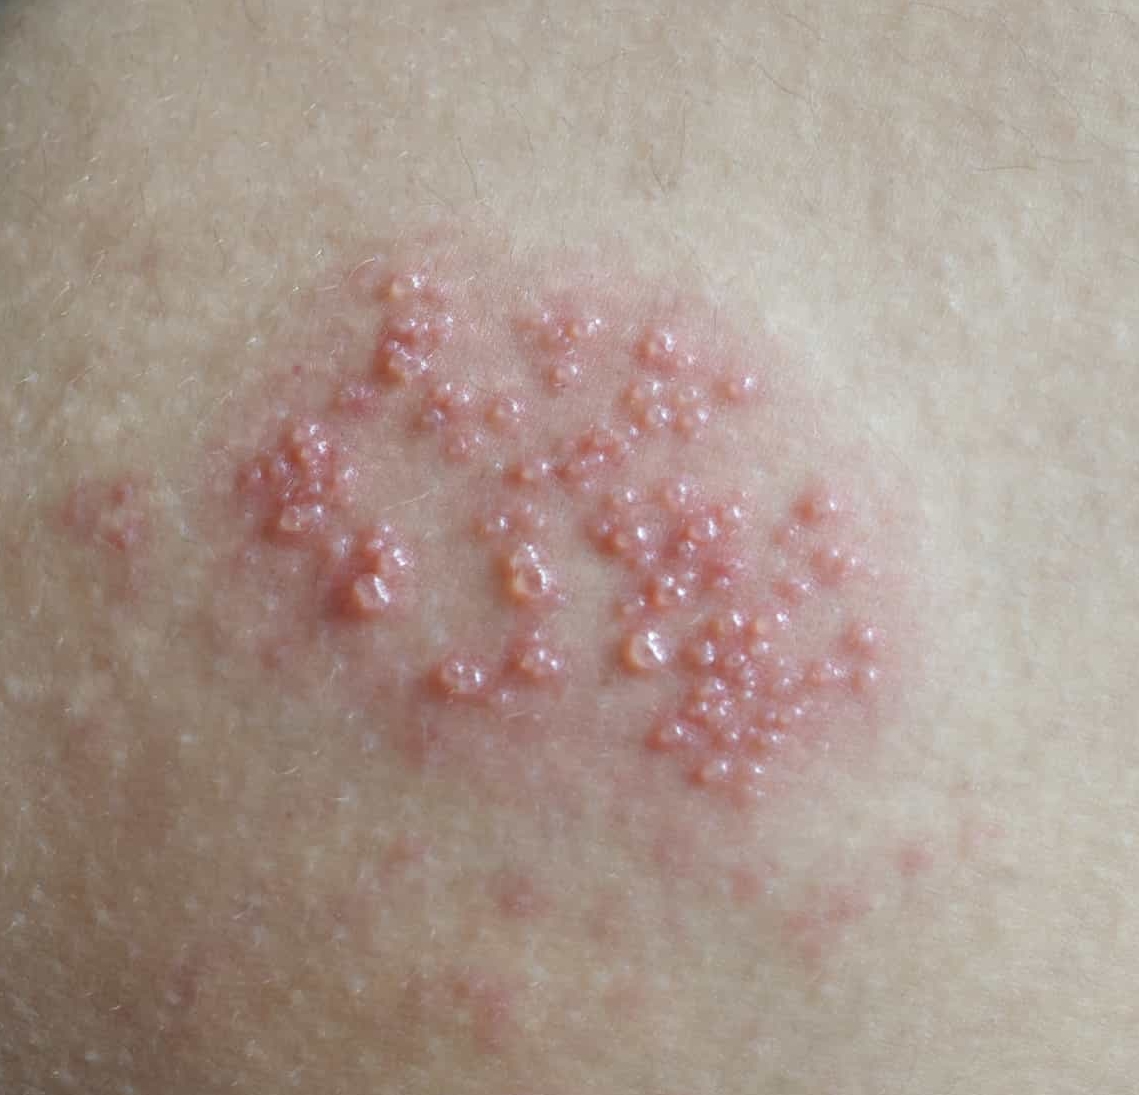 Genital Herpes on Thigh: Symptoms, Diagnosis, Treatment